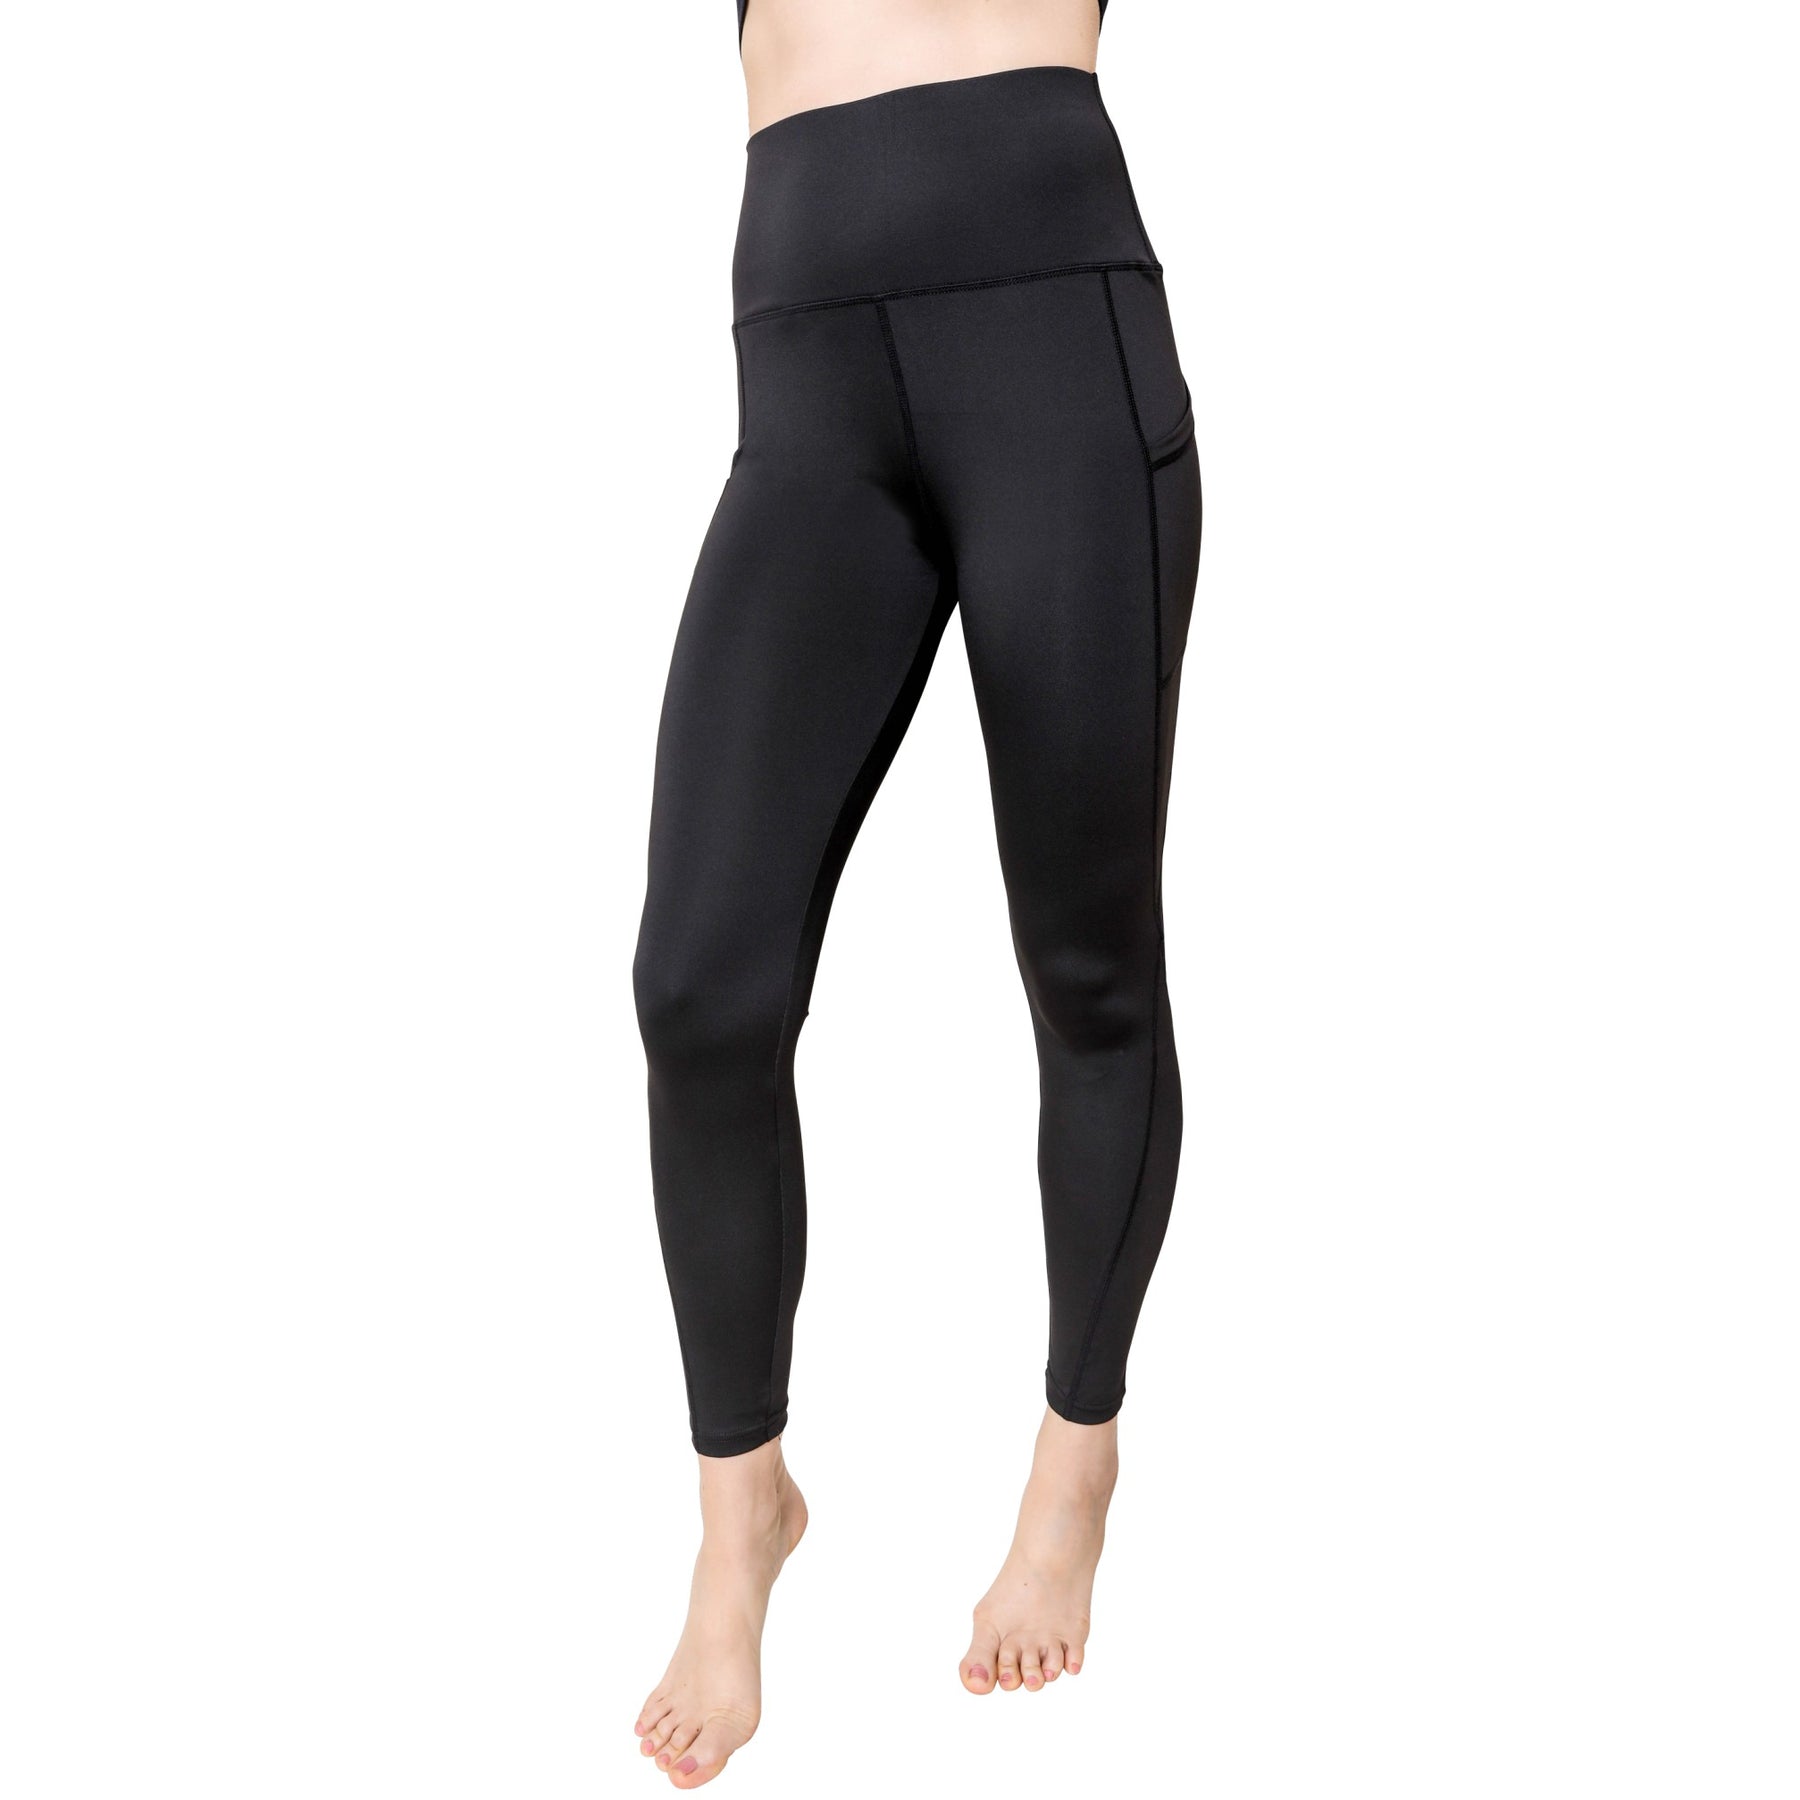 Black Buttery Soft Leggings With Side Pocket